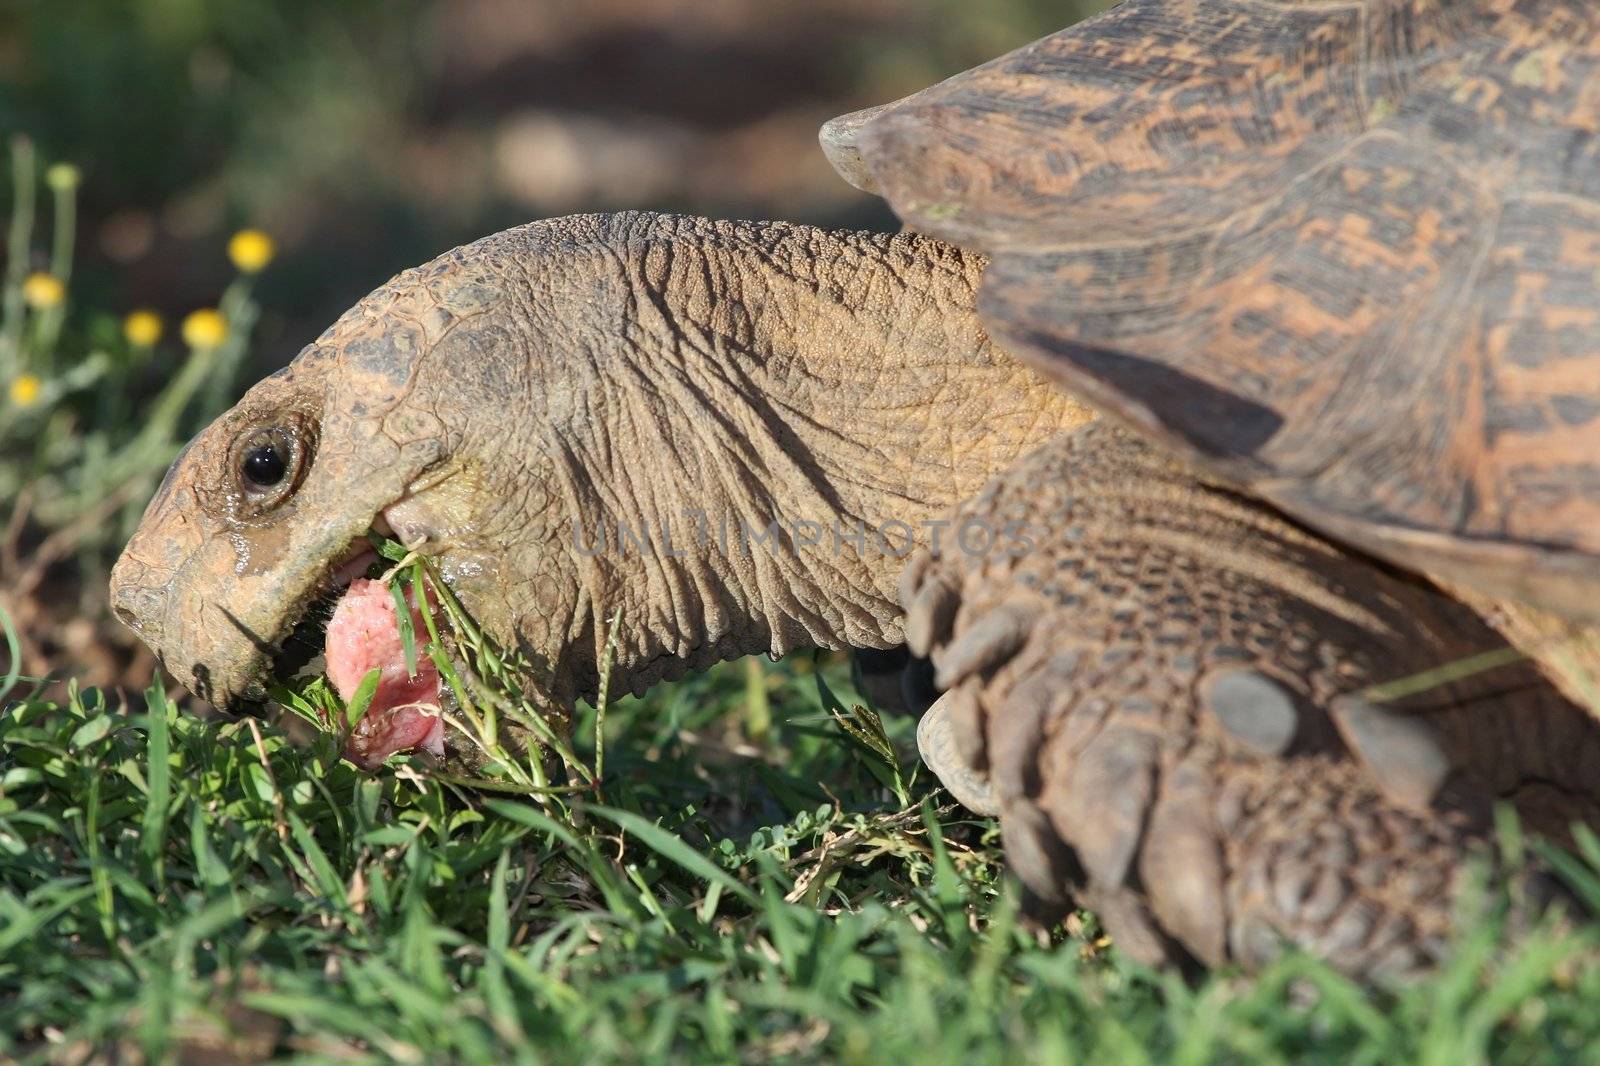 Leopard tortoise with mouth open showing pink tongue